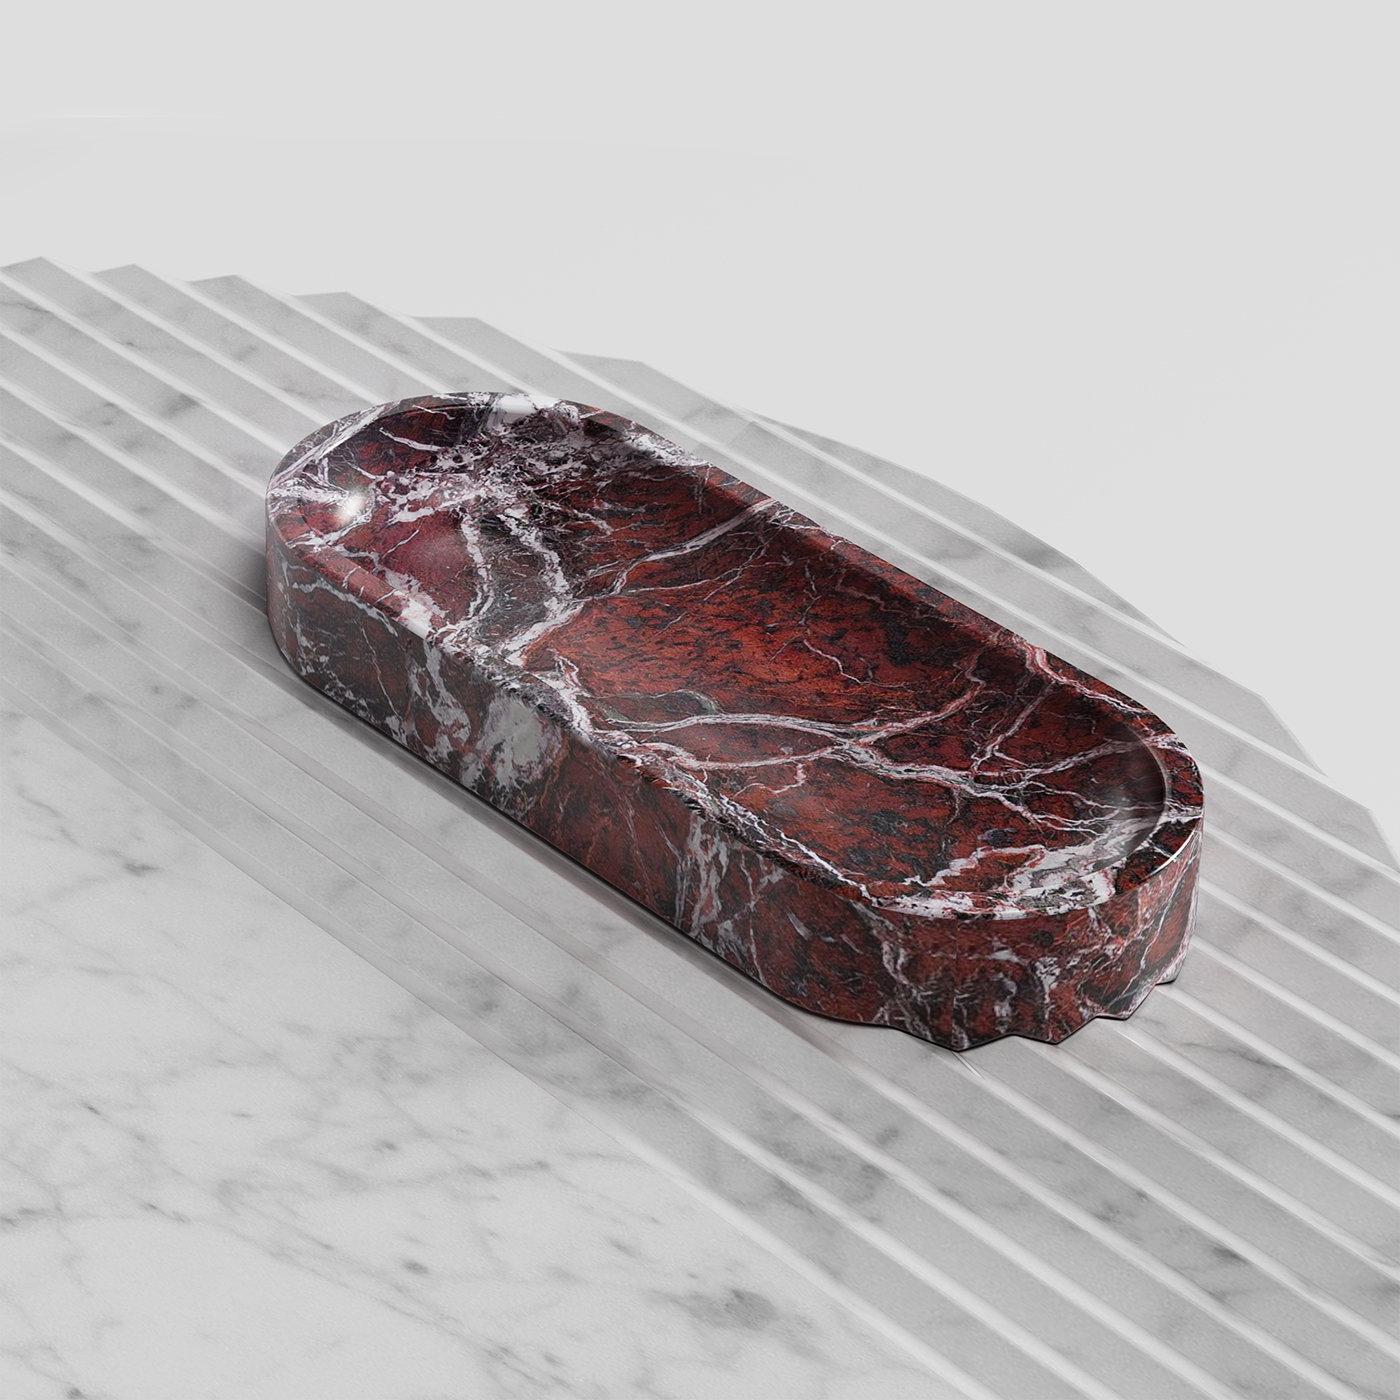 Equally ideal to display business cards in sophisticated waiting rooms or to offer pastries during a relaxing tea break, this elongated bowl with rounded extremities is crafted from prized red Levanto marble. Produced in Tuscany region, its